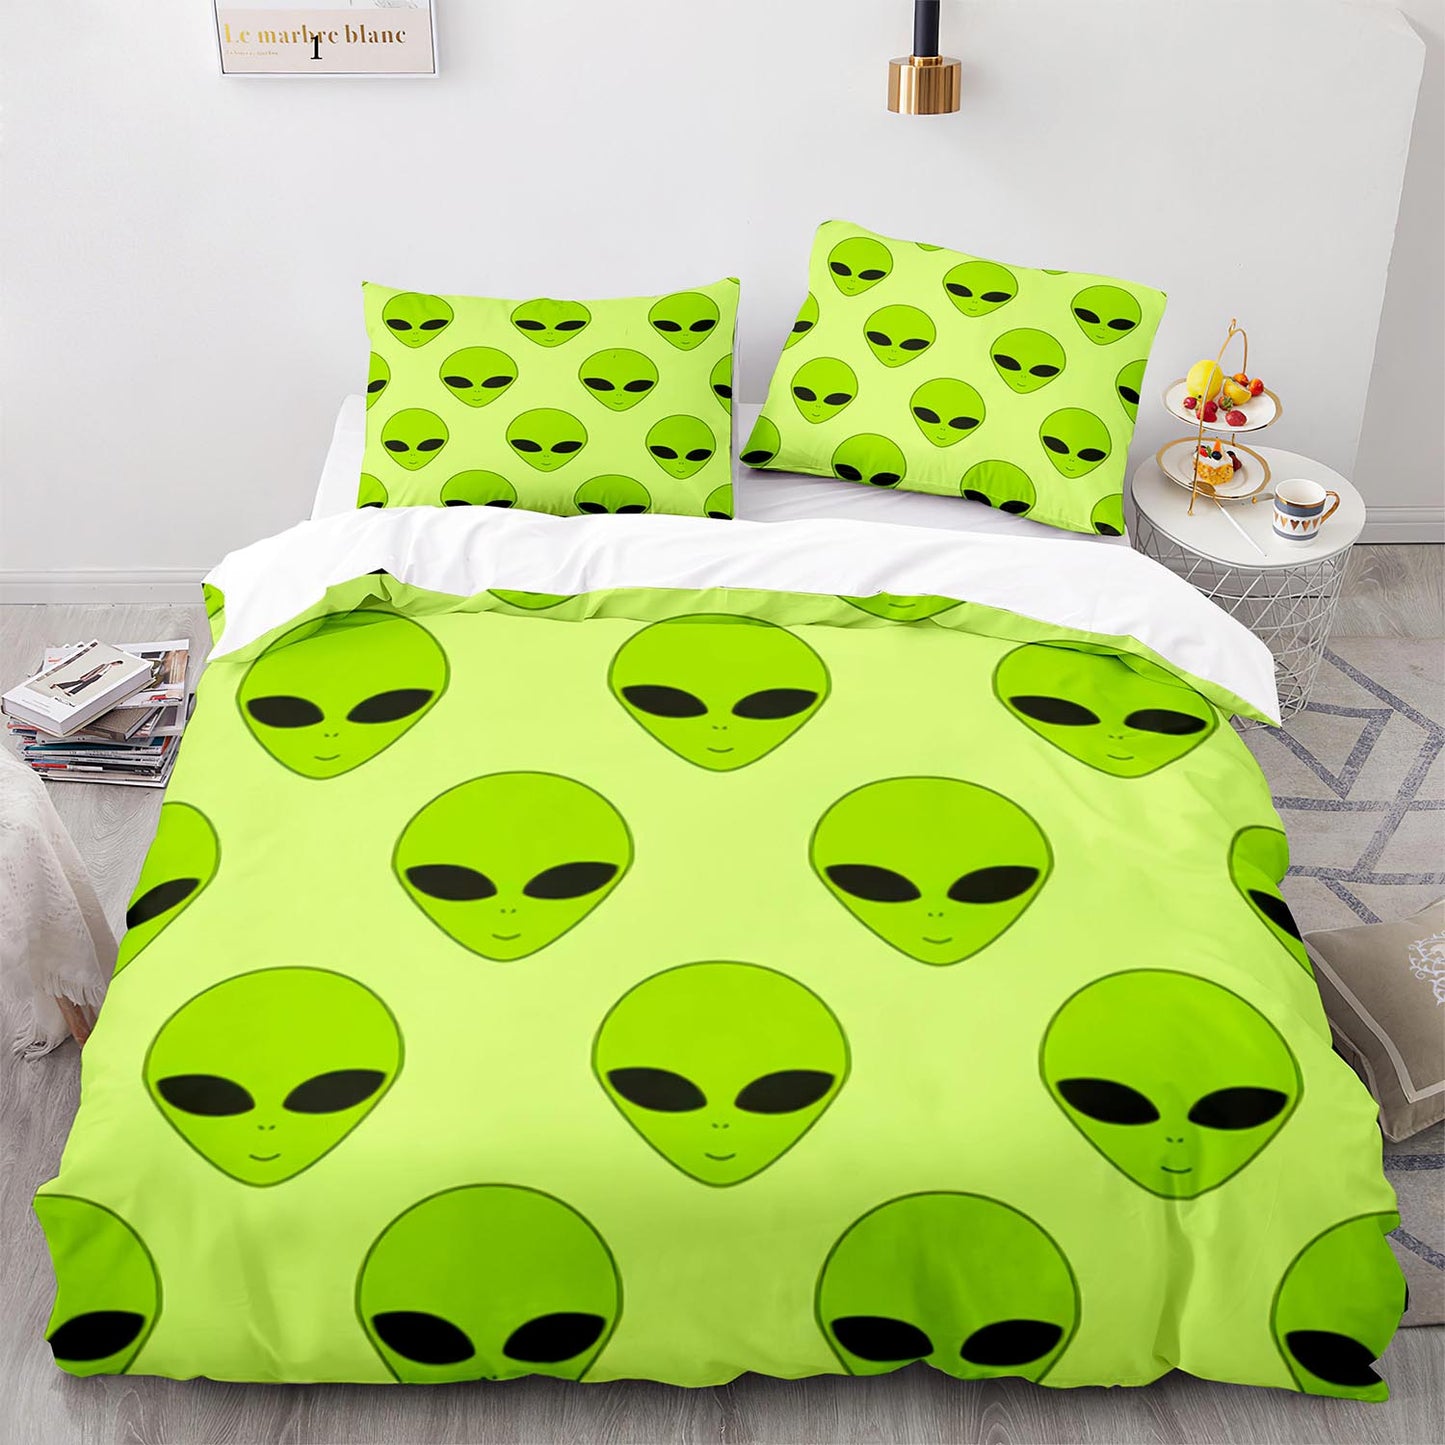 Cutom Duvet Cover Set Pattern Chic Comforter Cover King Size for Teens Adults Bedding Set with Pillowcases  WXR1025